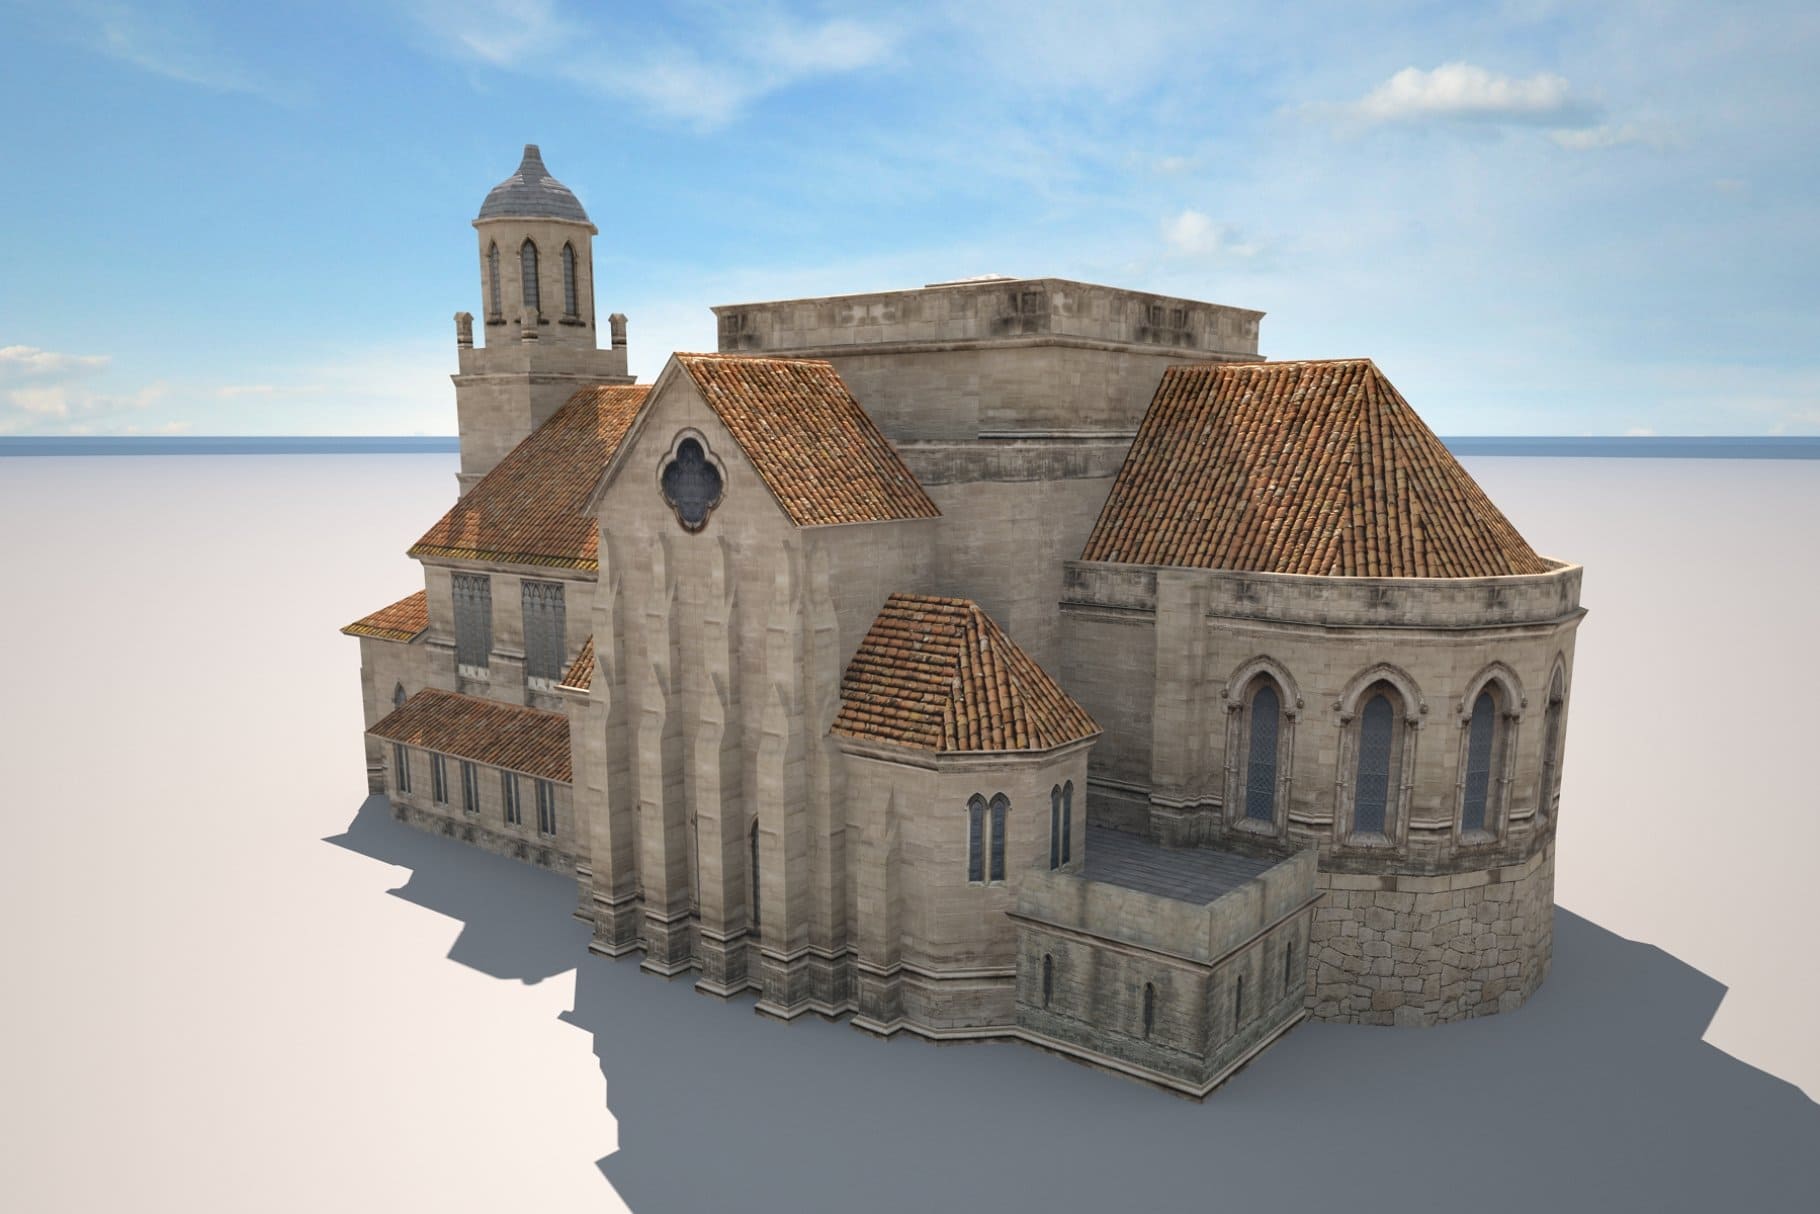 A combination of semicircular and rectangular structures in a 3D model of a church building.